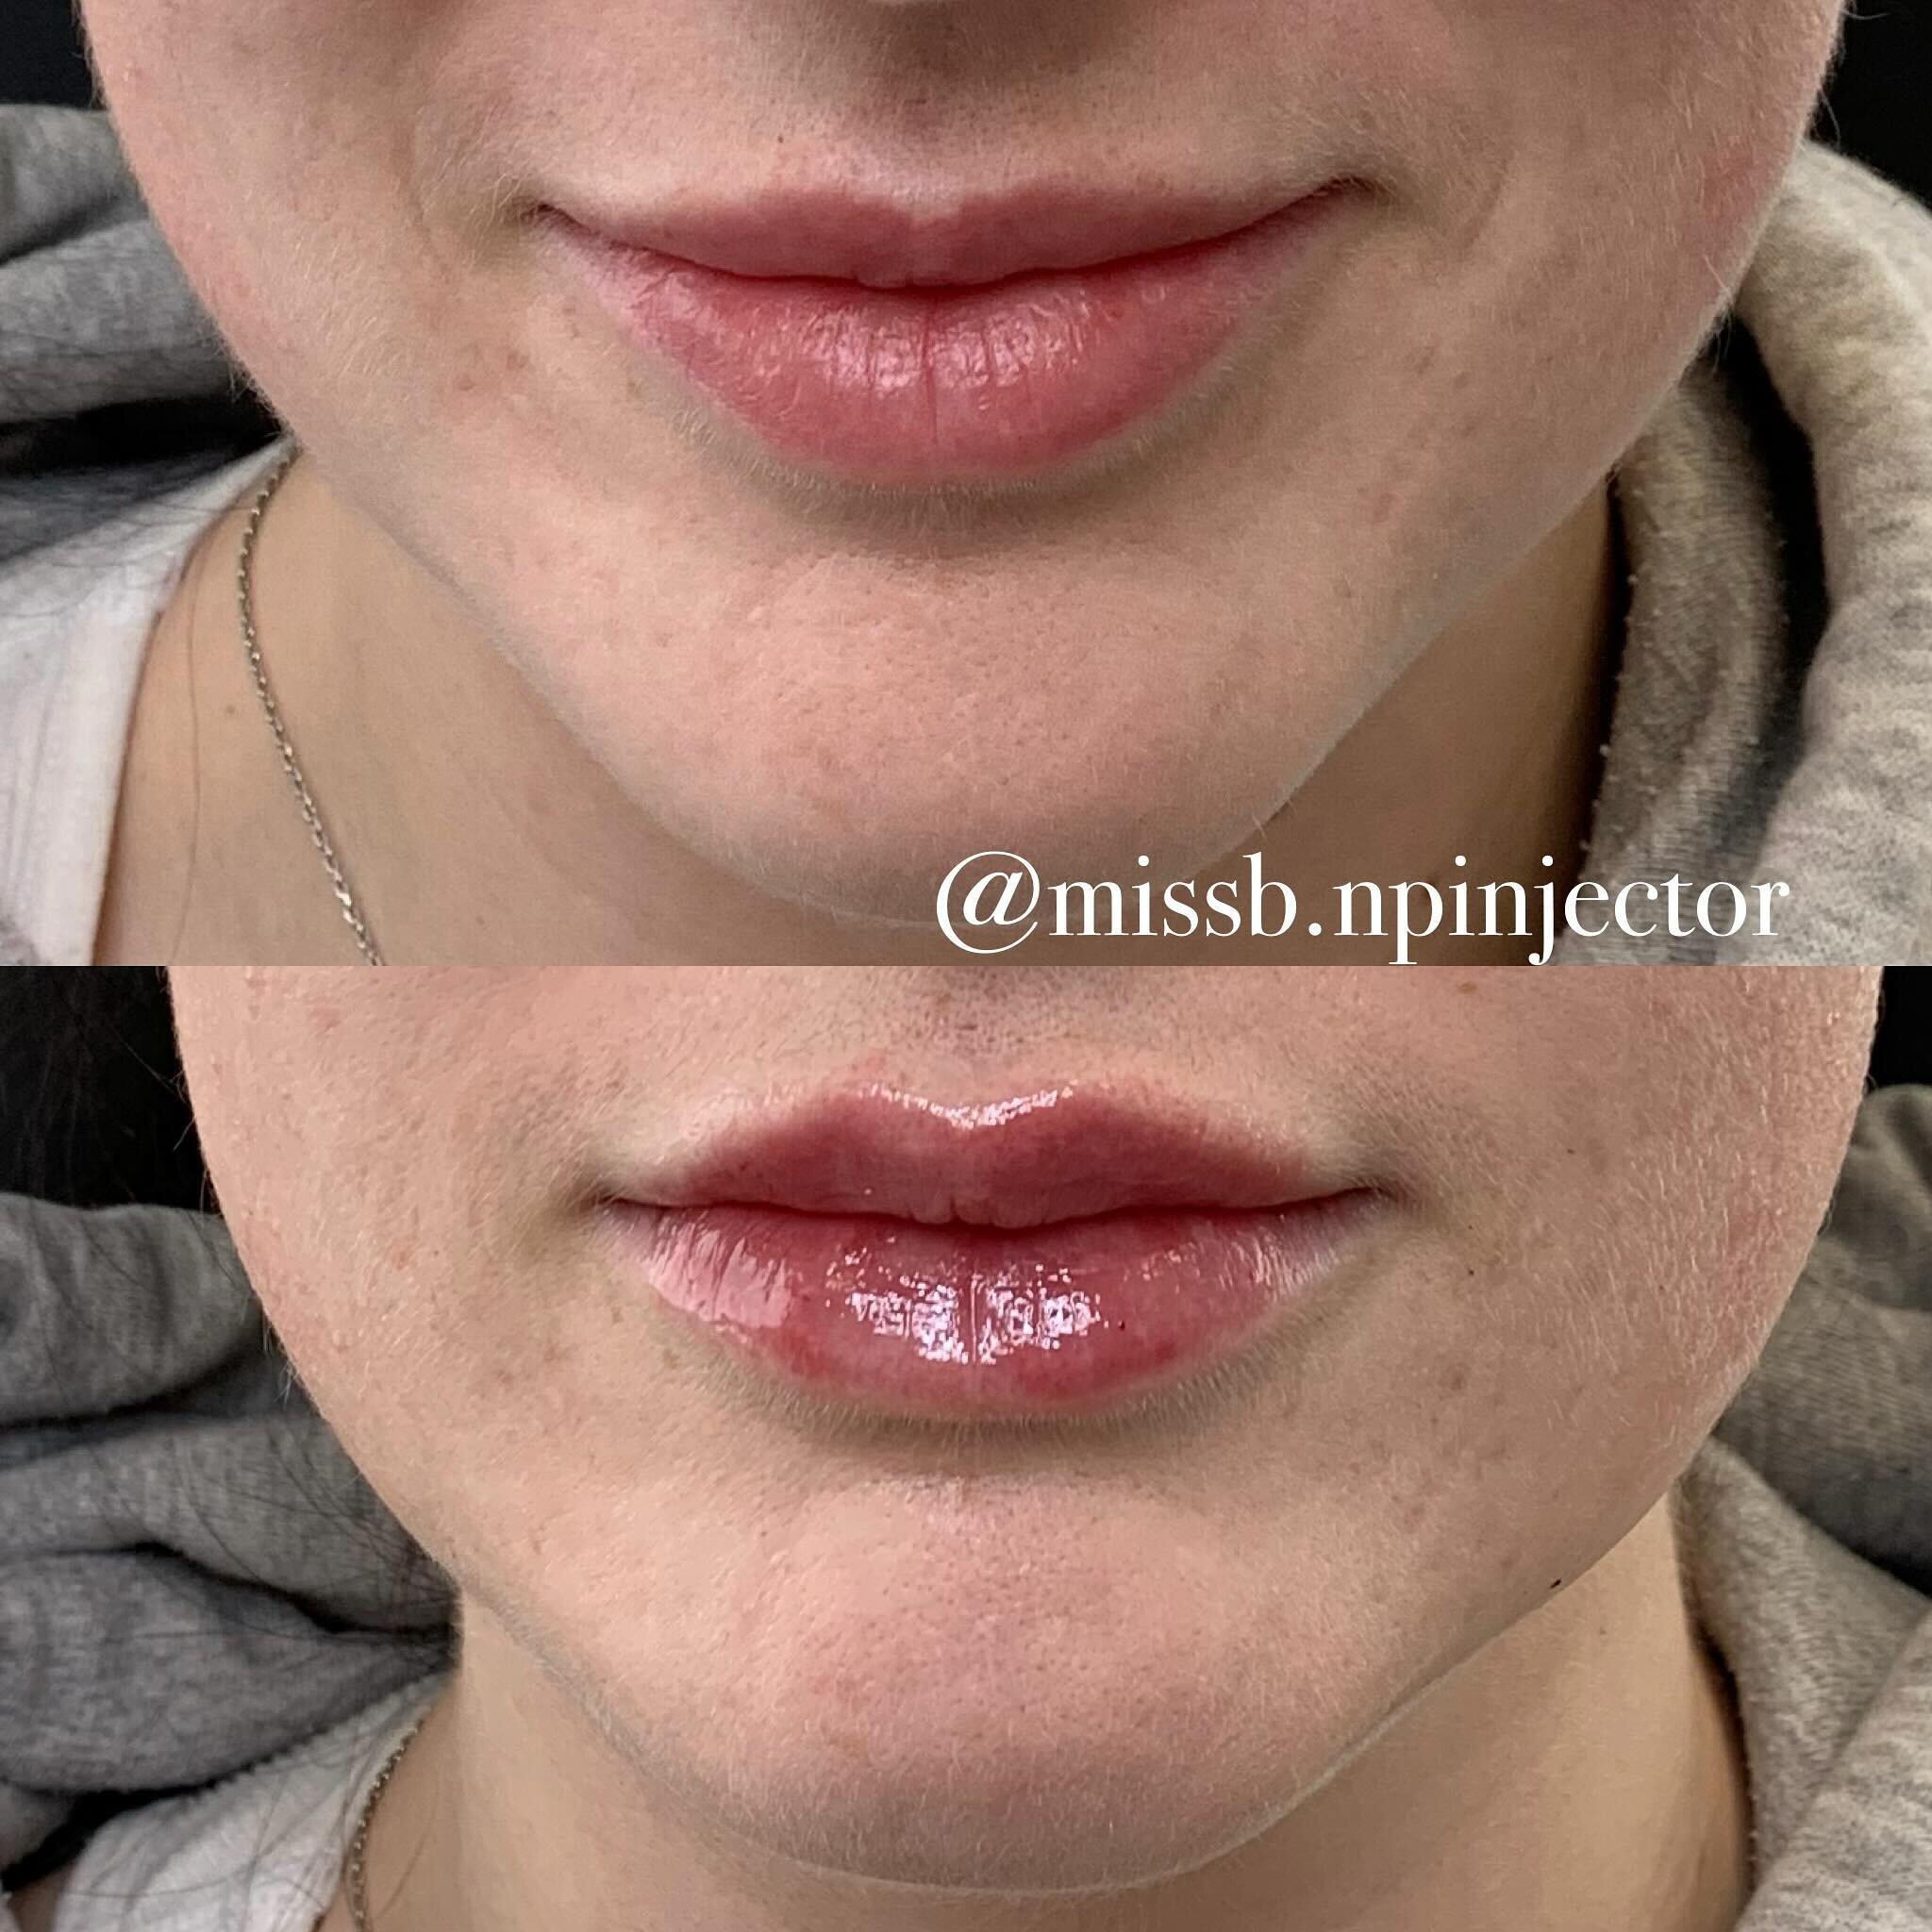 It may be snowing AGAIN but these lips are 🔥!
@bk.luxe 
#beforeandafter #lipfiller #liprefresh #saturday #npinjector #miramichi